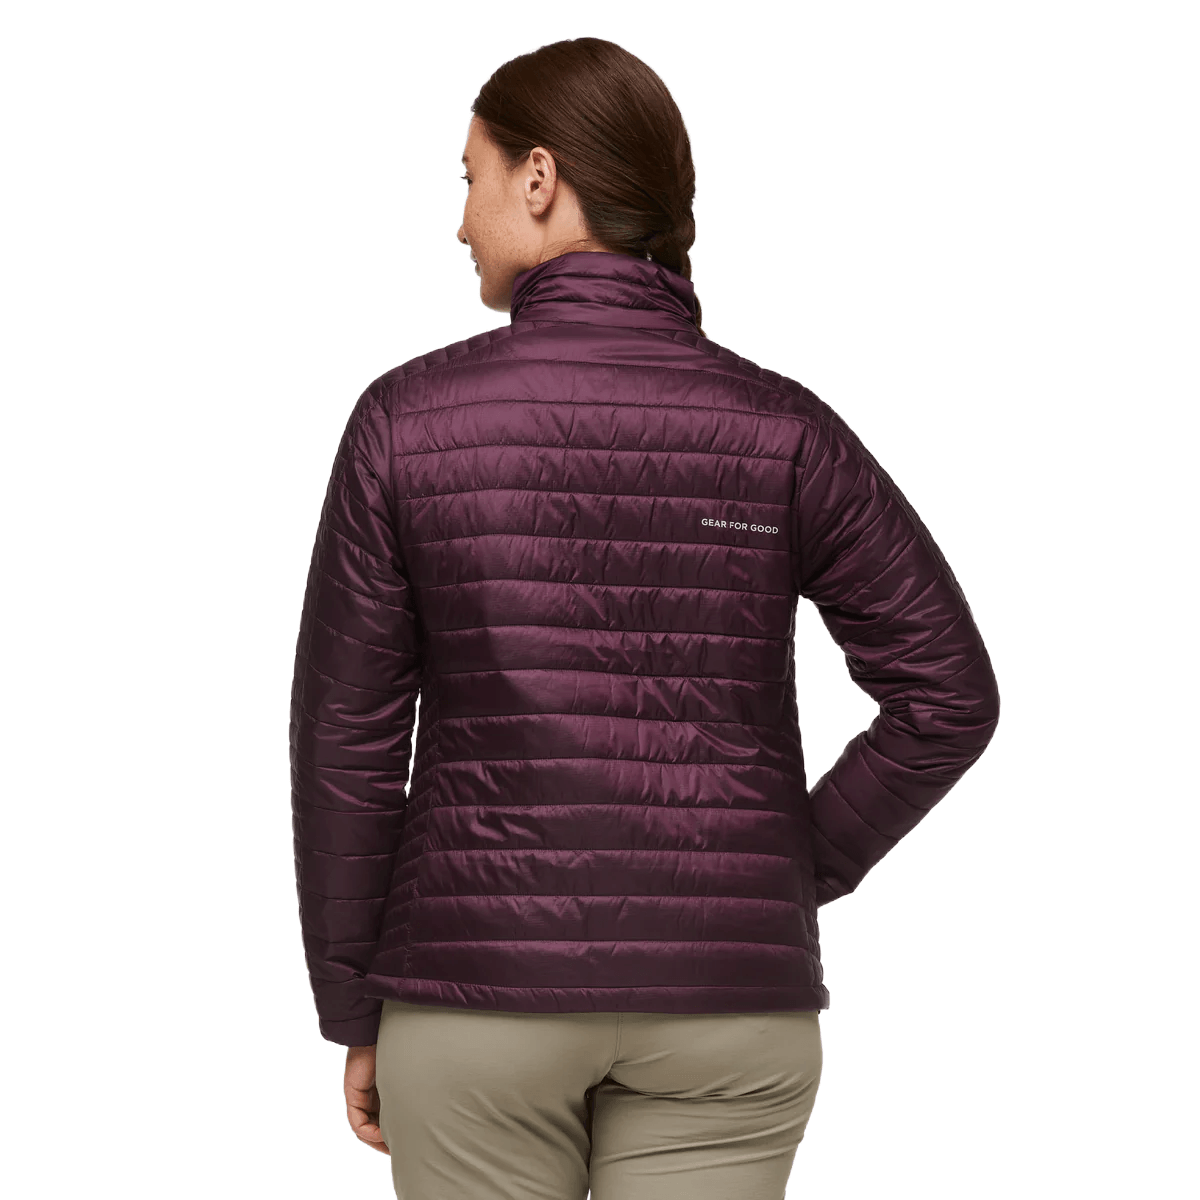 Capa Insulated Jacket - Women's – Cotopaxi